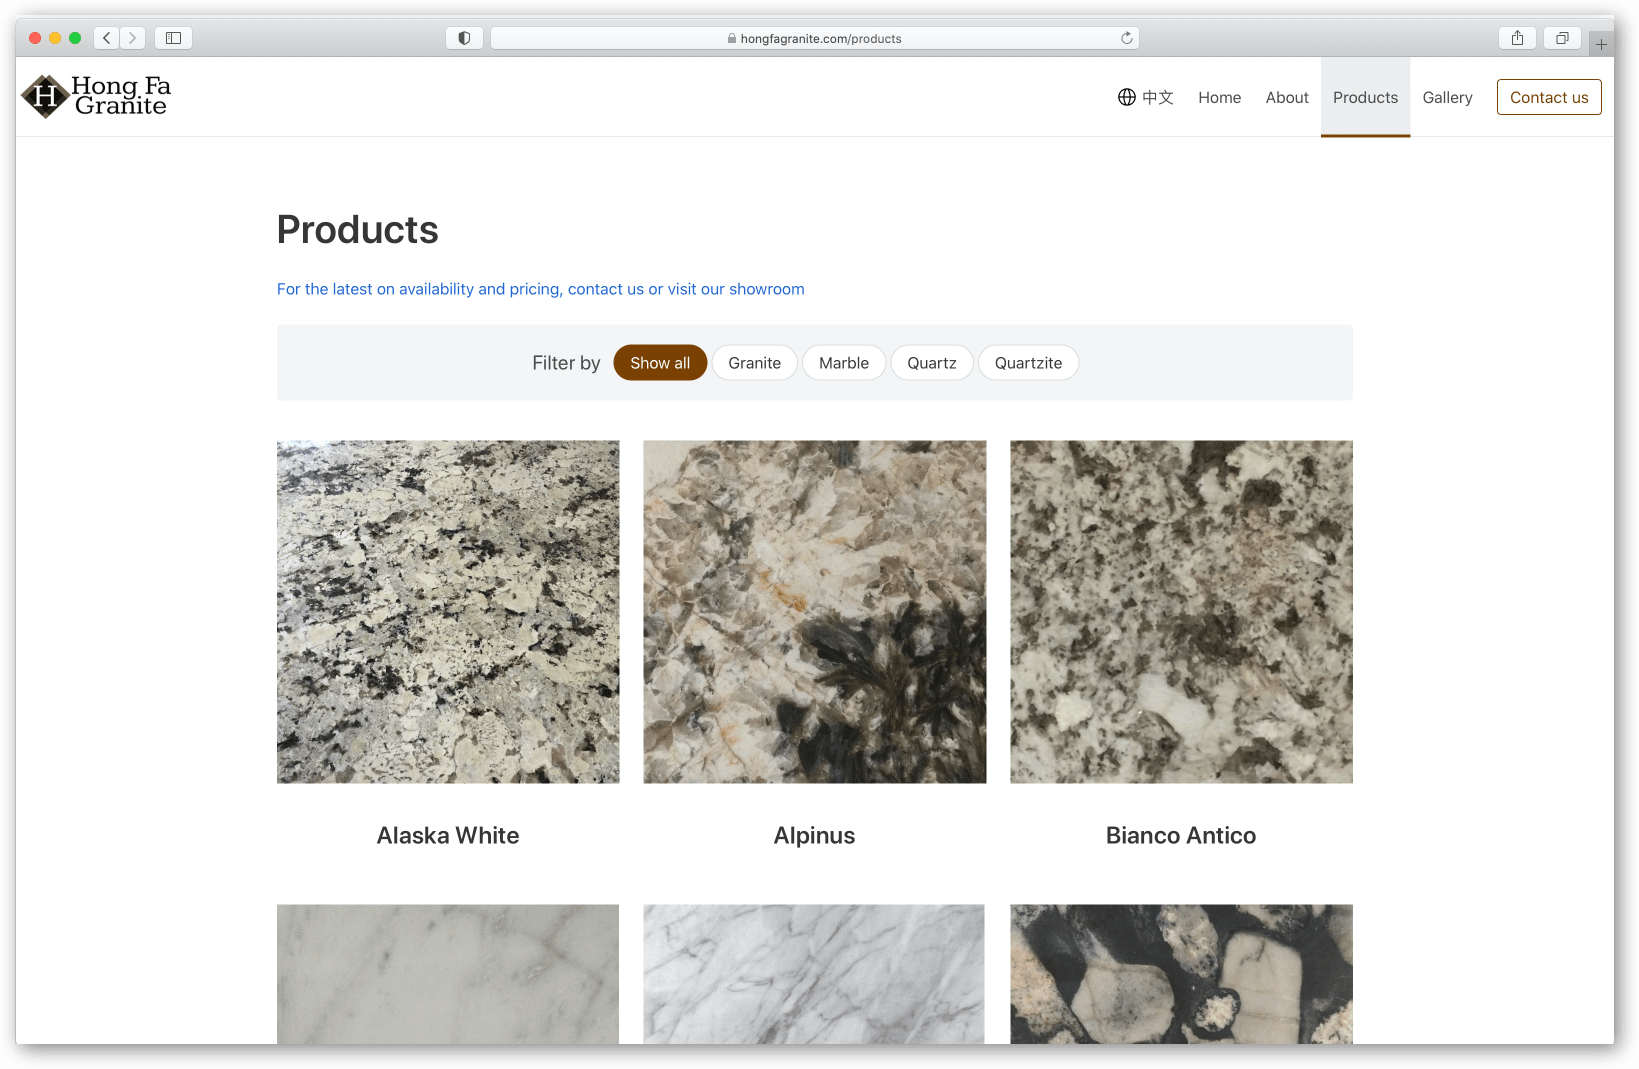 Products page of Hong fa granite.com